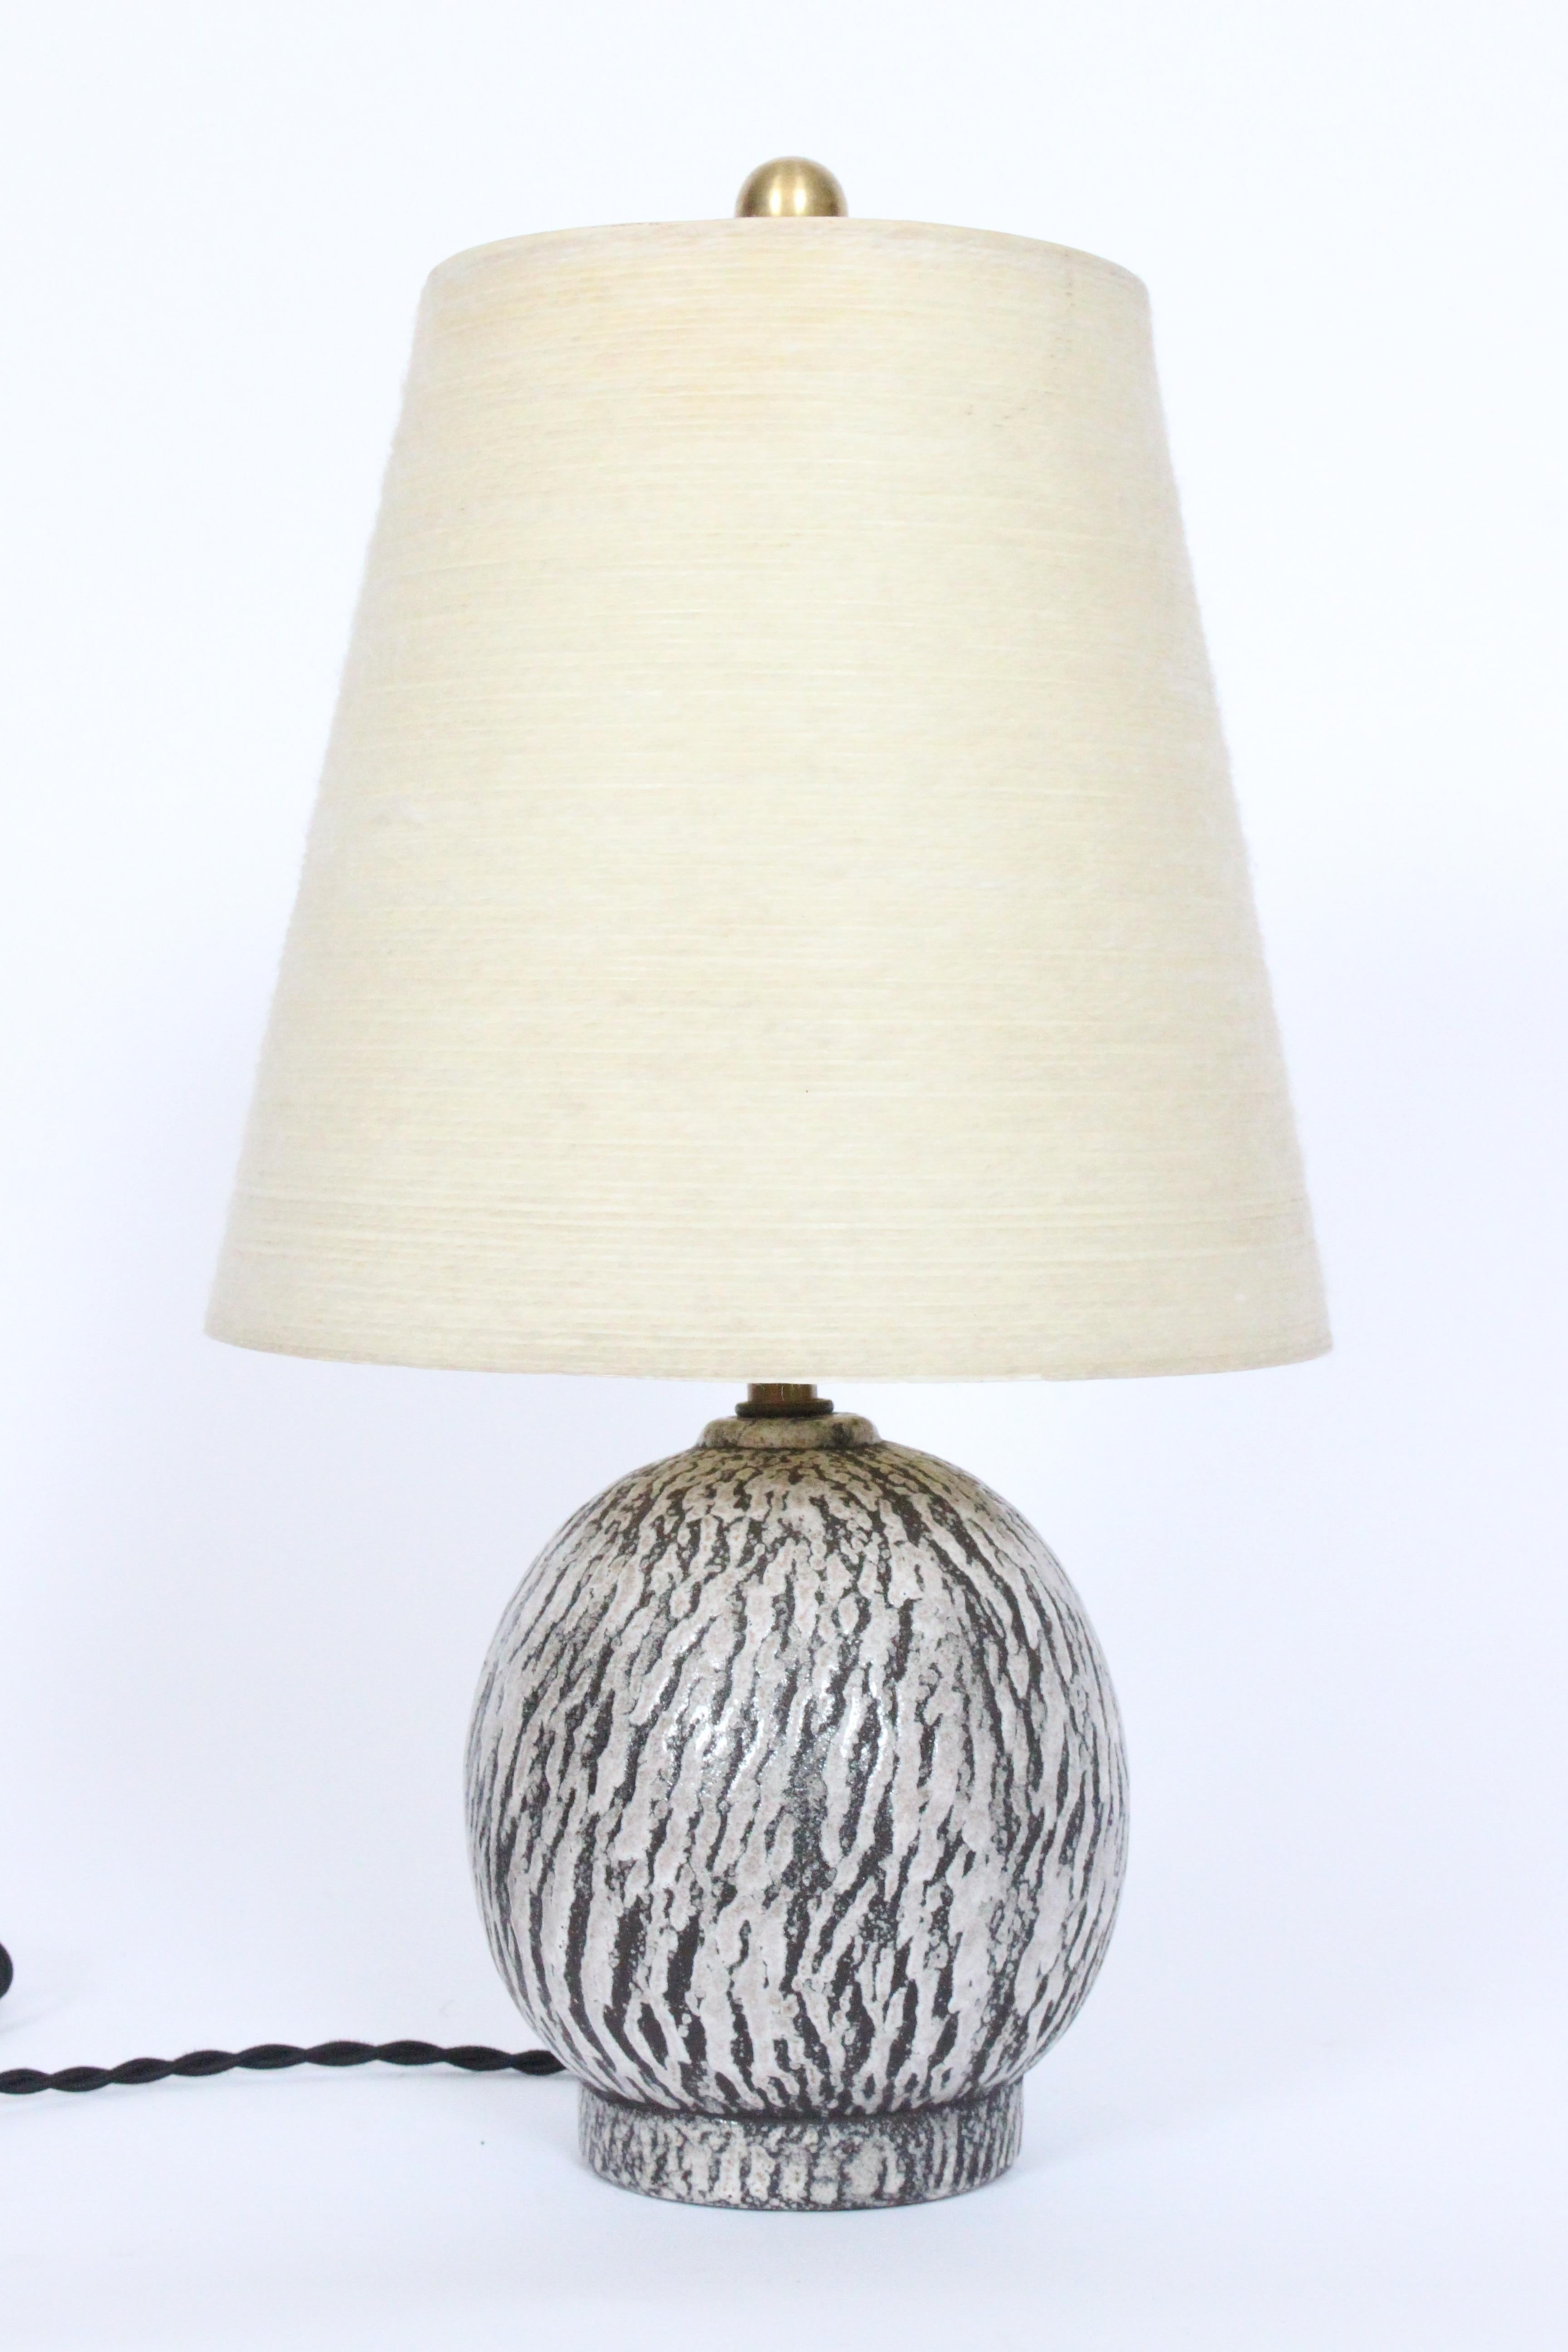 Petite Kelby White & Charcoal Drip Glaze Pottery Table Lamp, 1950's For Sale 7